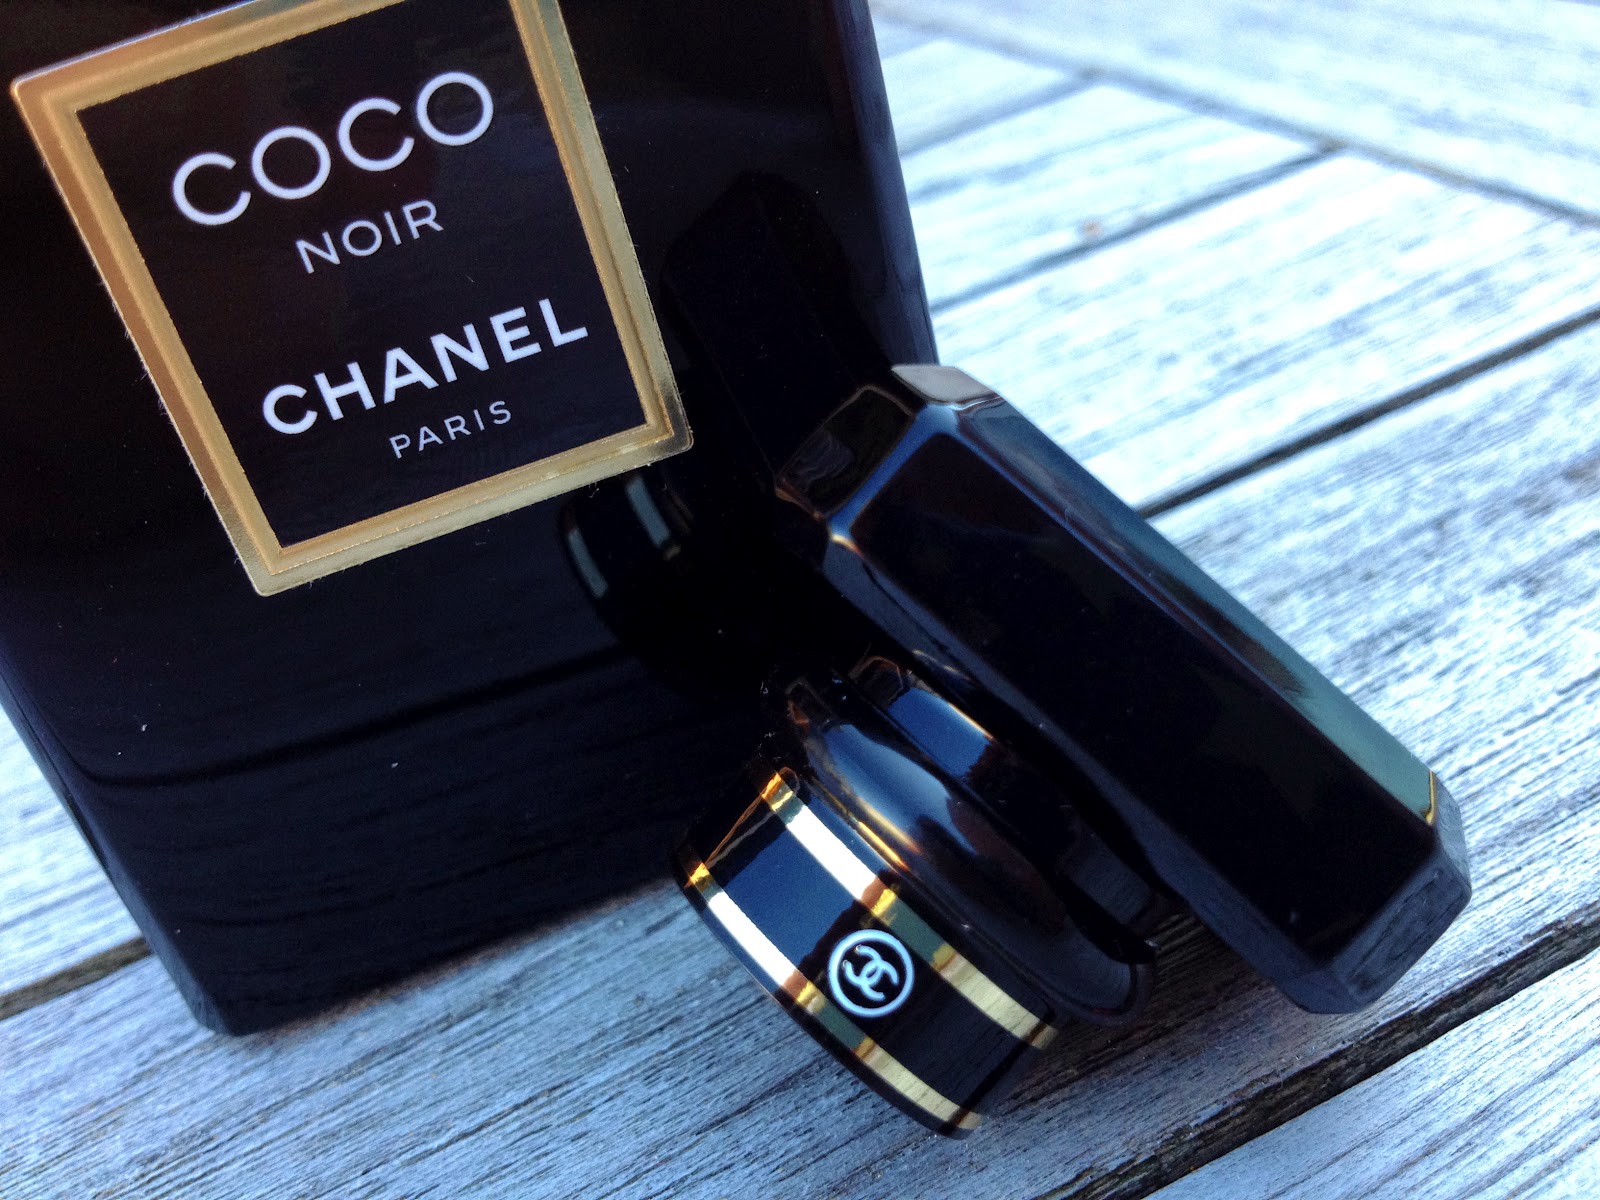 Sprinkles on a cupcake: Chanel Coco Noir